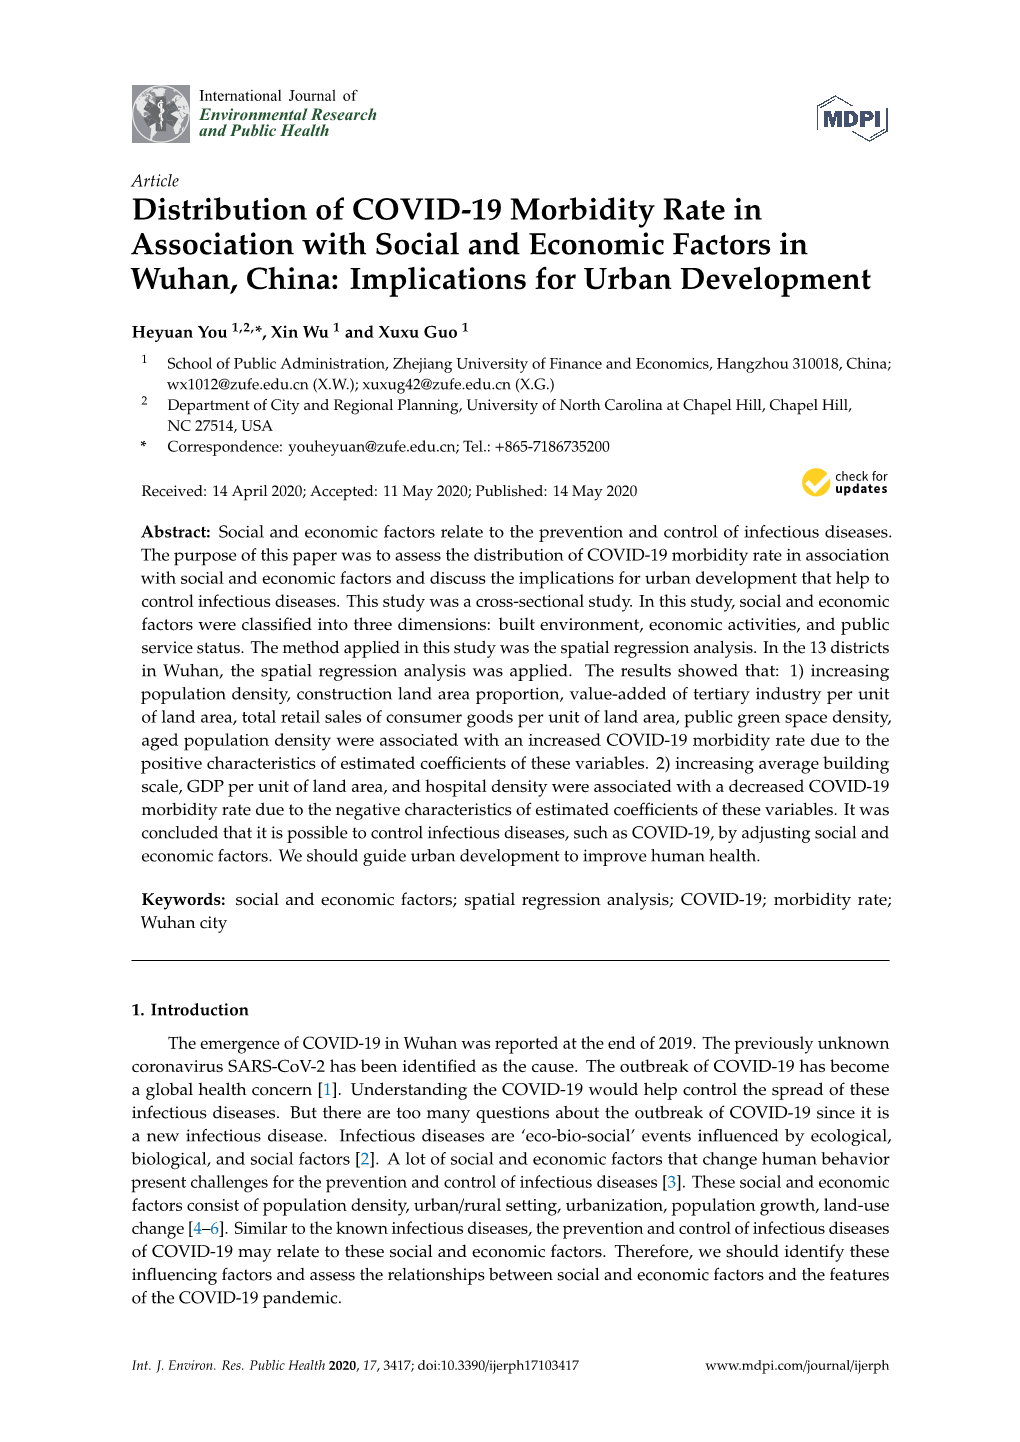 Distribution of COVID-19 Morbidity Rate in Association with Social and Economic Factors in Wuhan, China: Implications for Urban Development